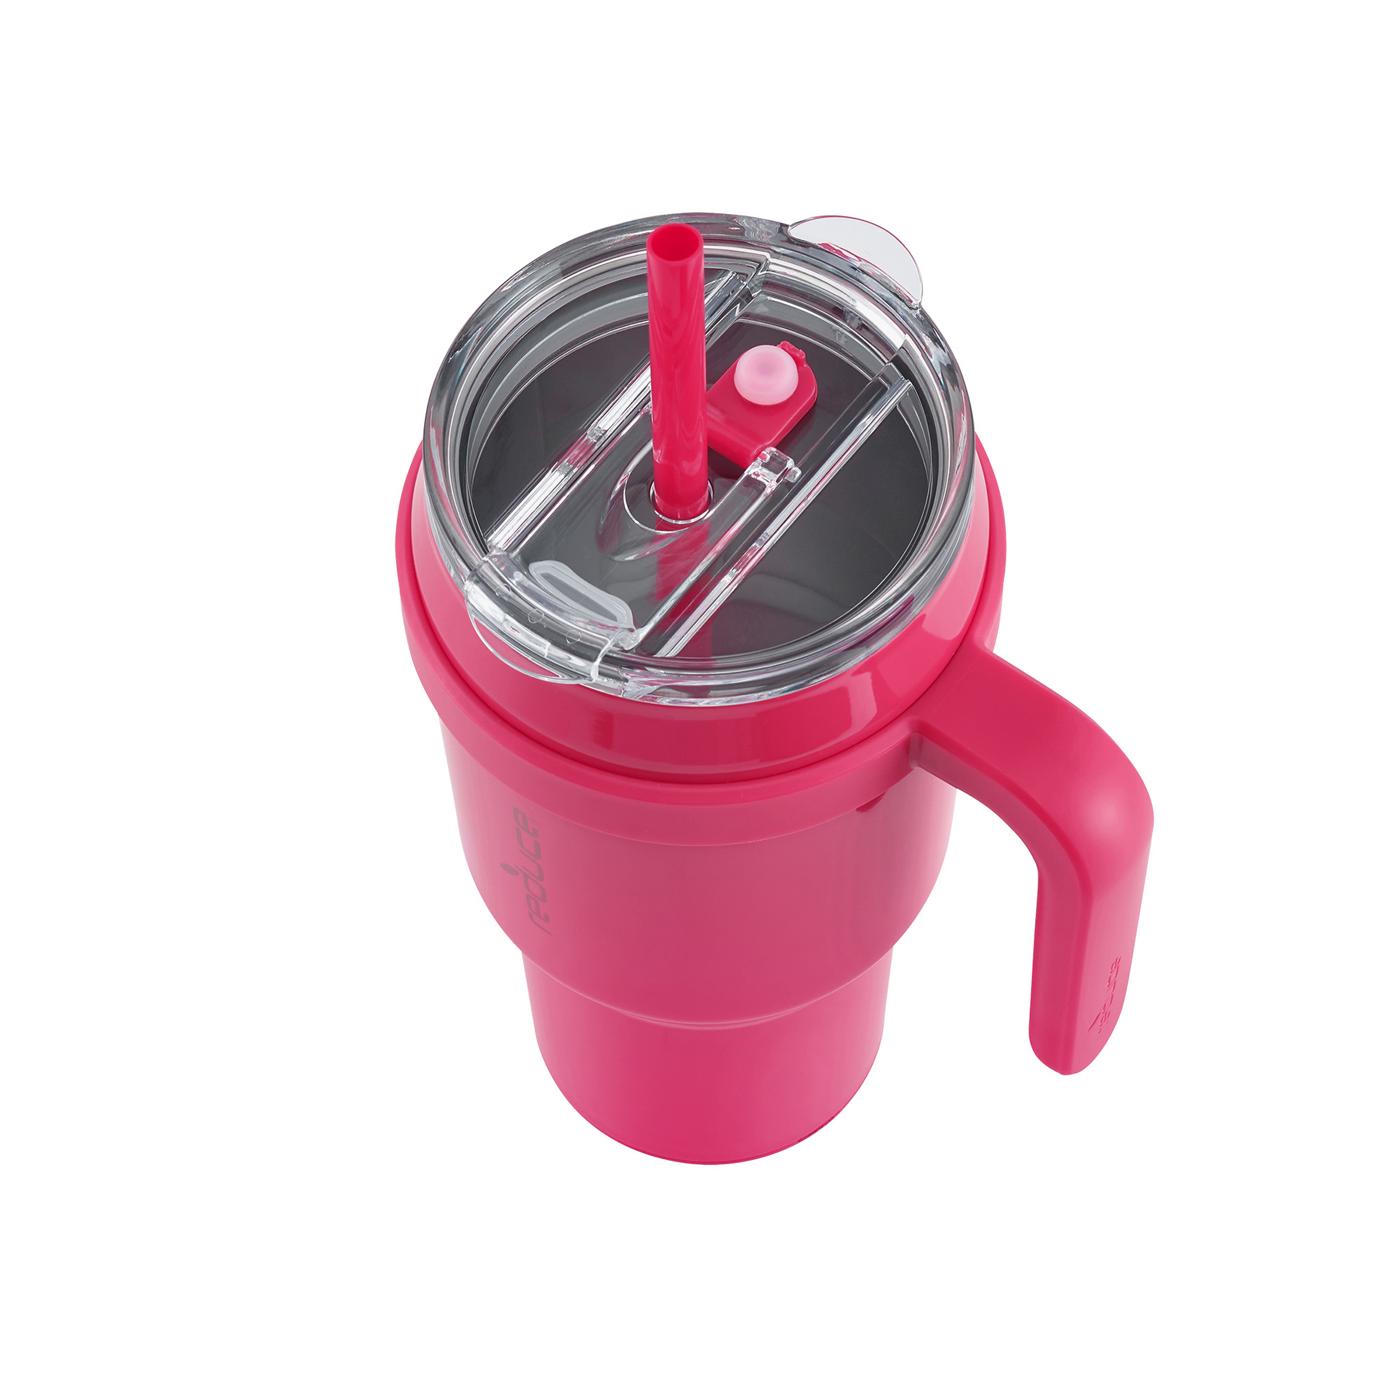 BERK 8011034 - 32 oz. Insulated cup w/handle, straw and lid